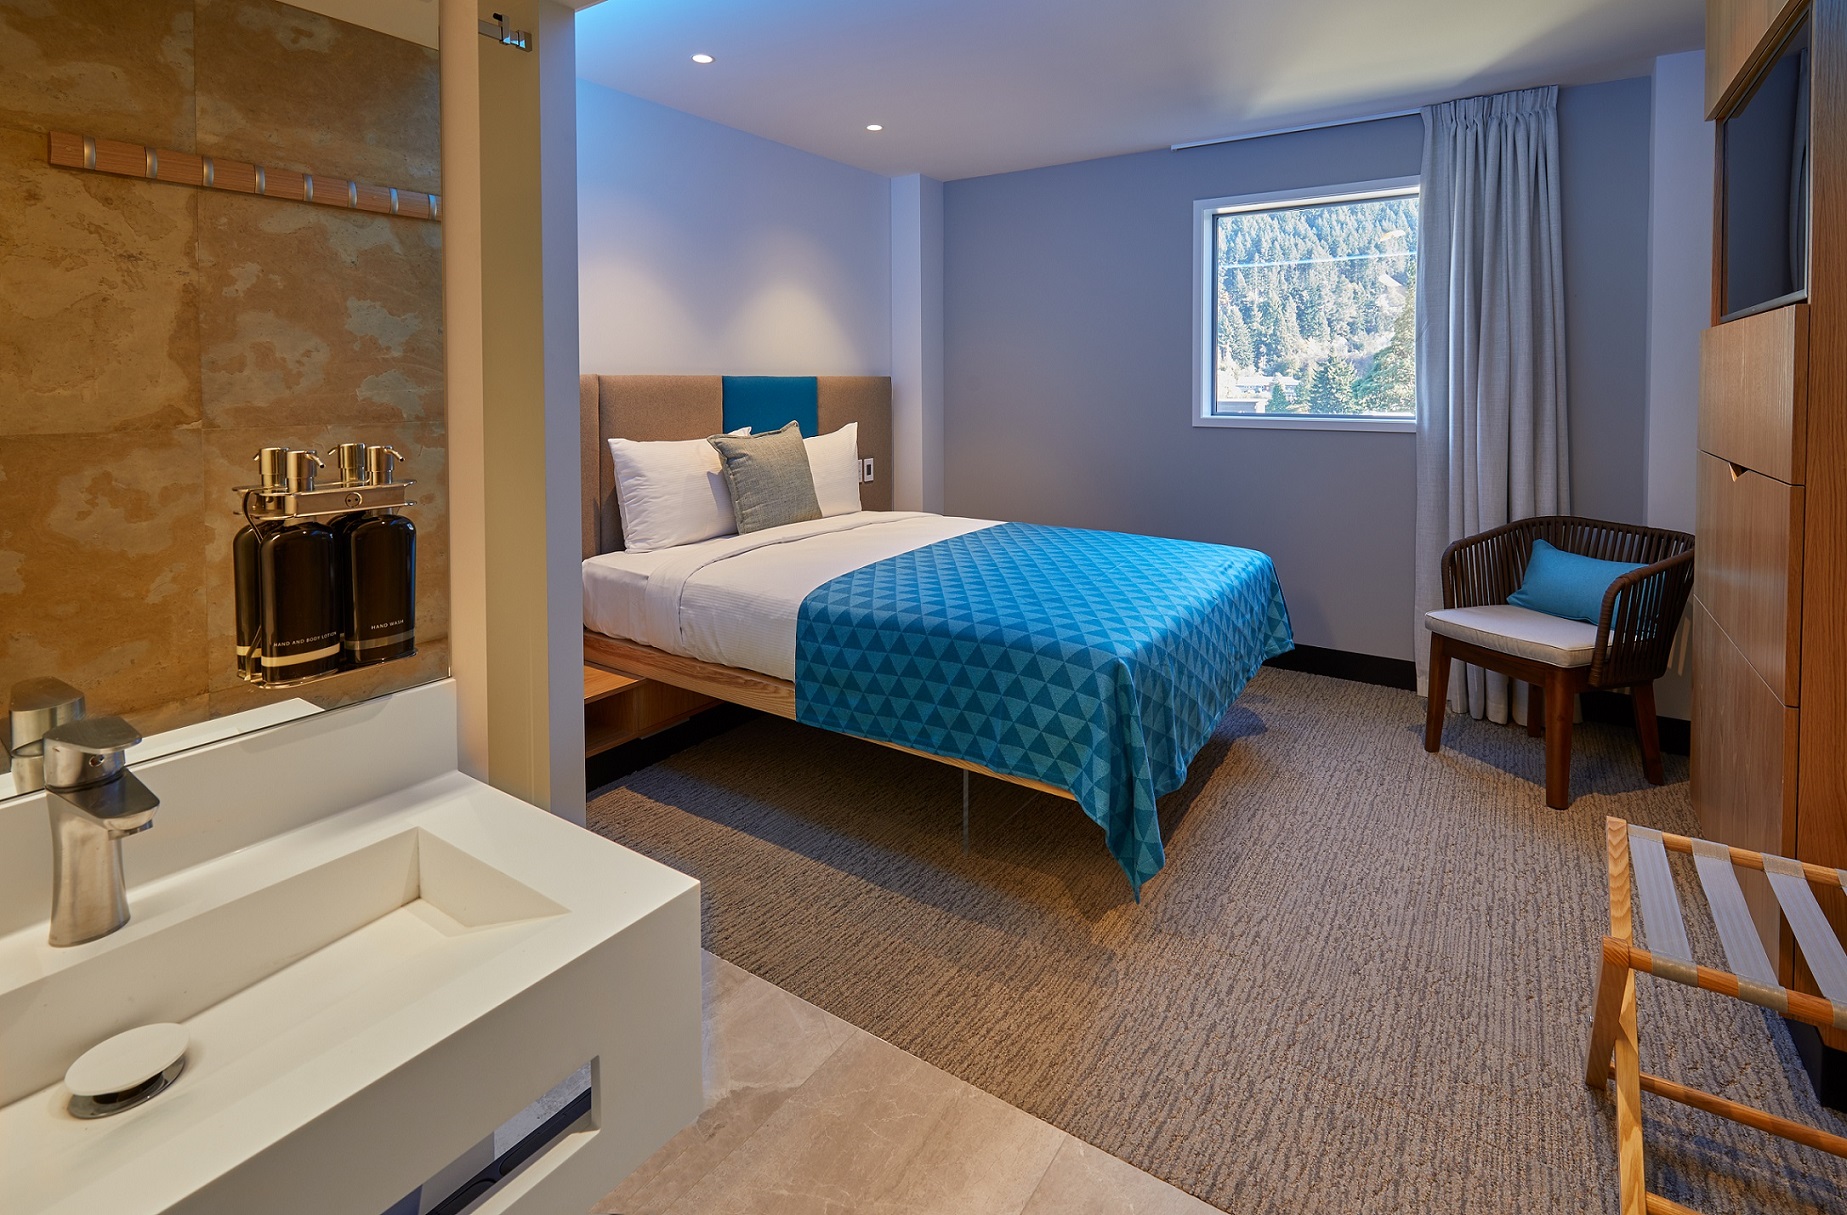 1-rooms-featuring-the-latest-technology-at-mi-pad-queenstown